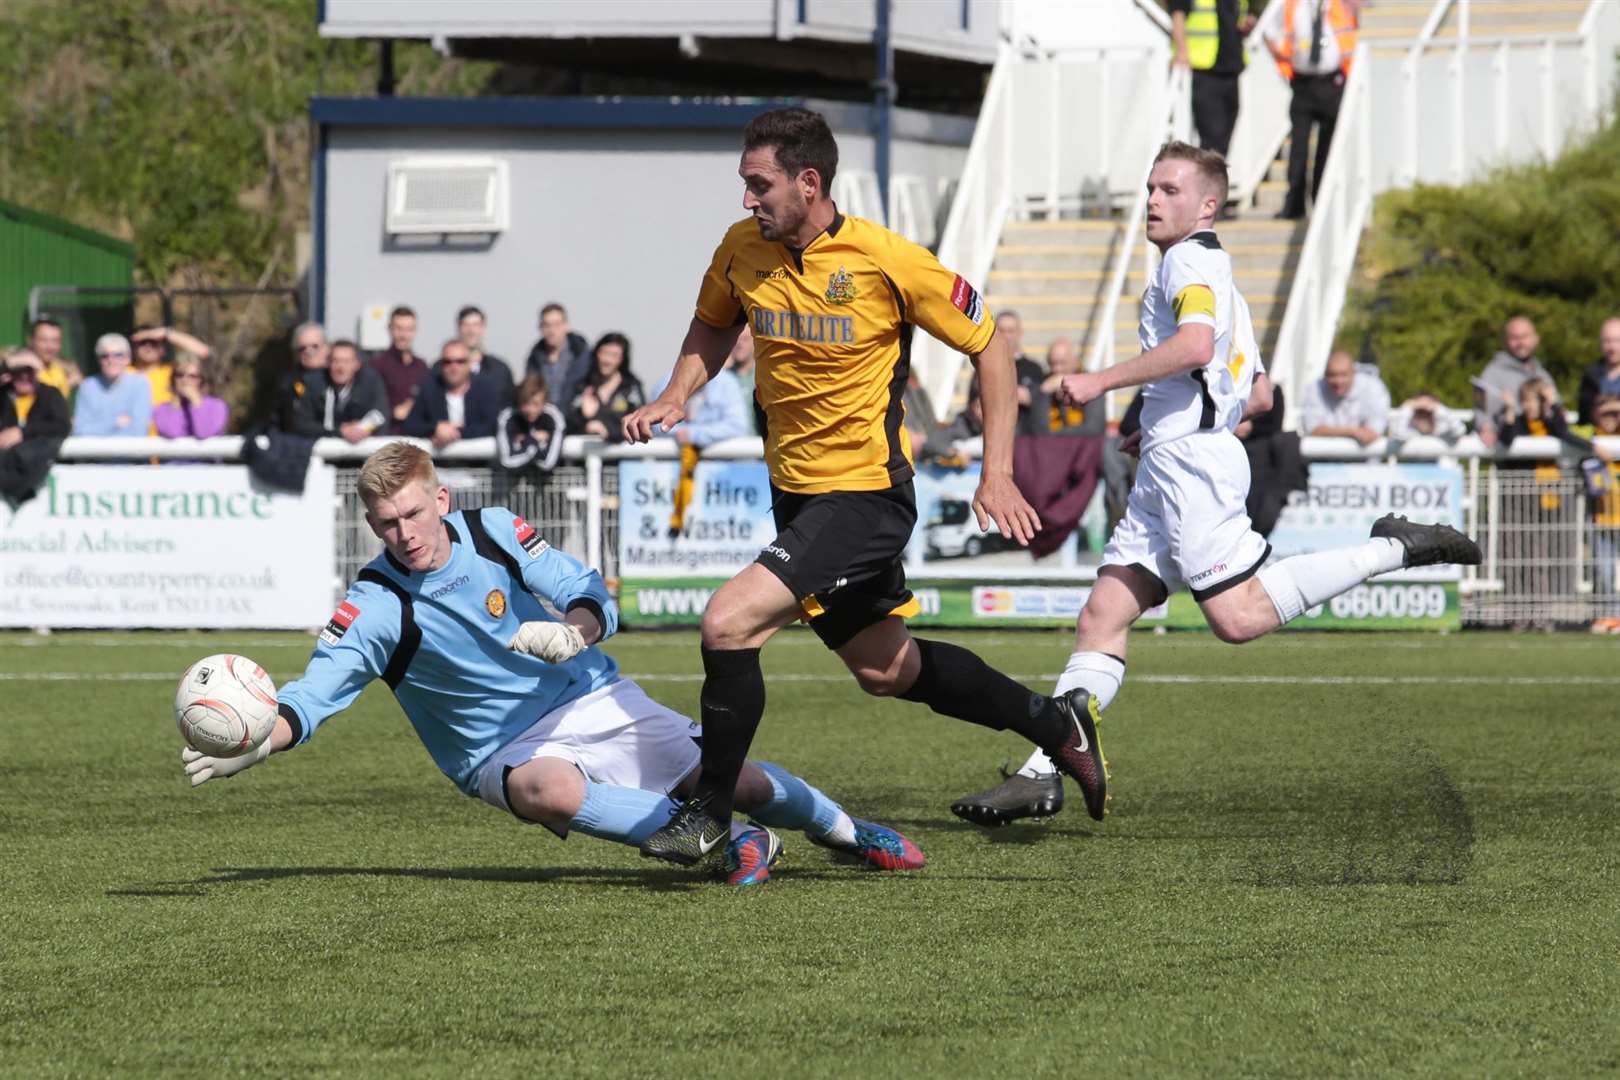 Jay May was Maidstone's leading scorer in their title season with 24 goals